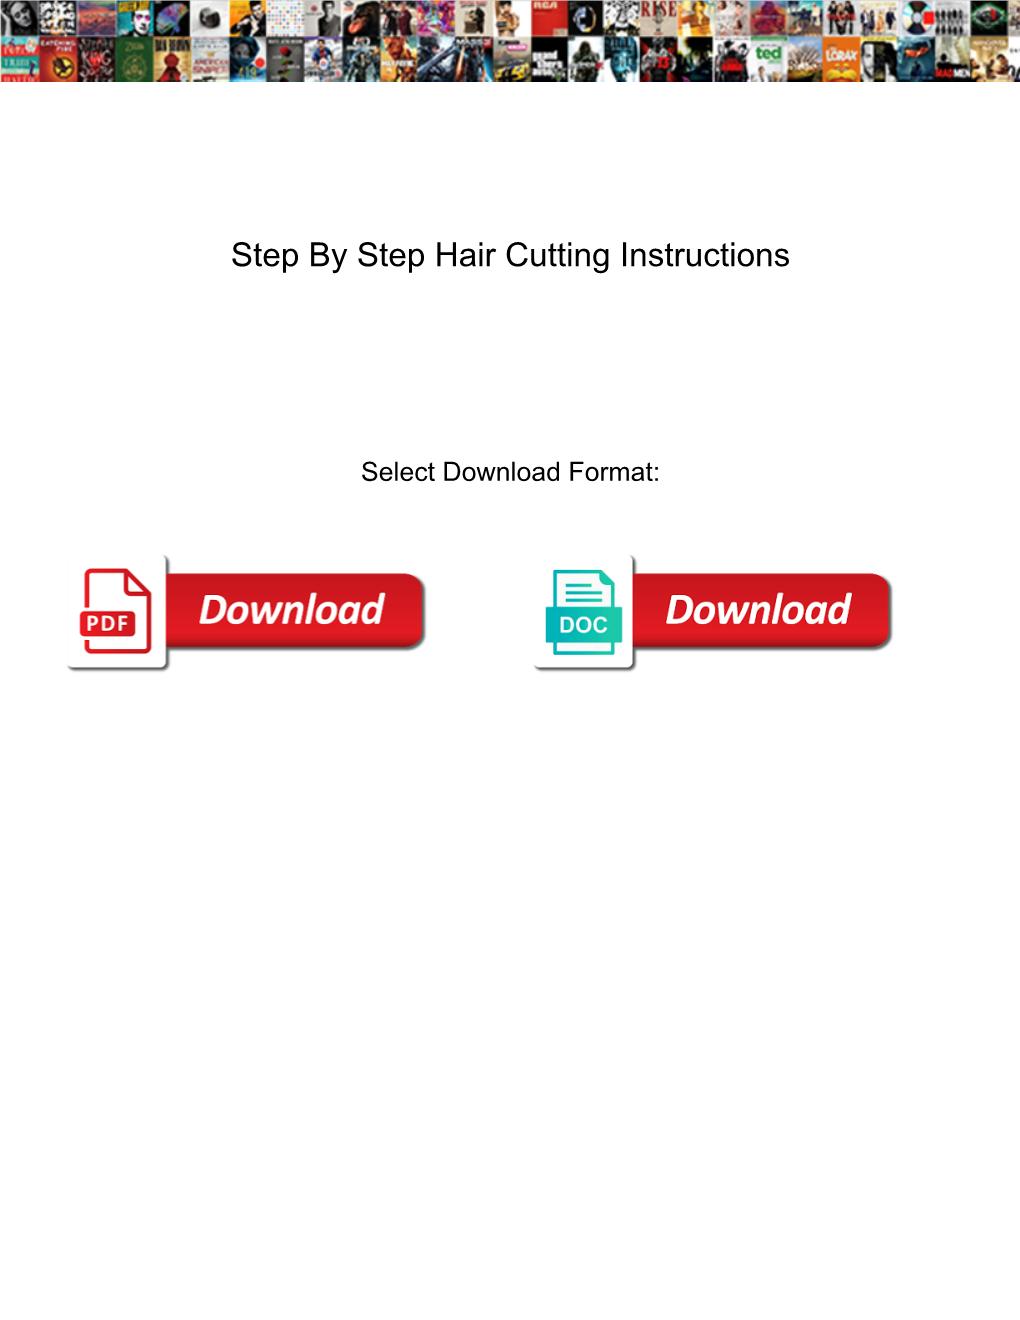 Step by Step Hair Cutting Instructions